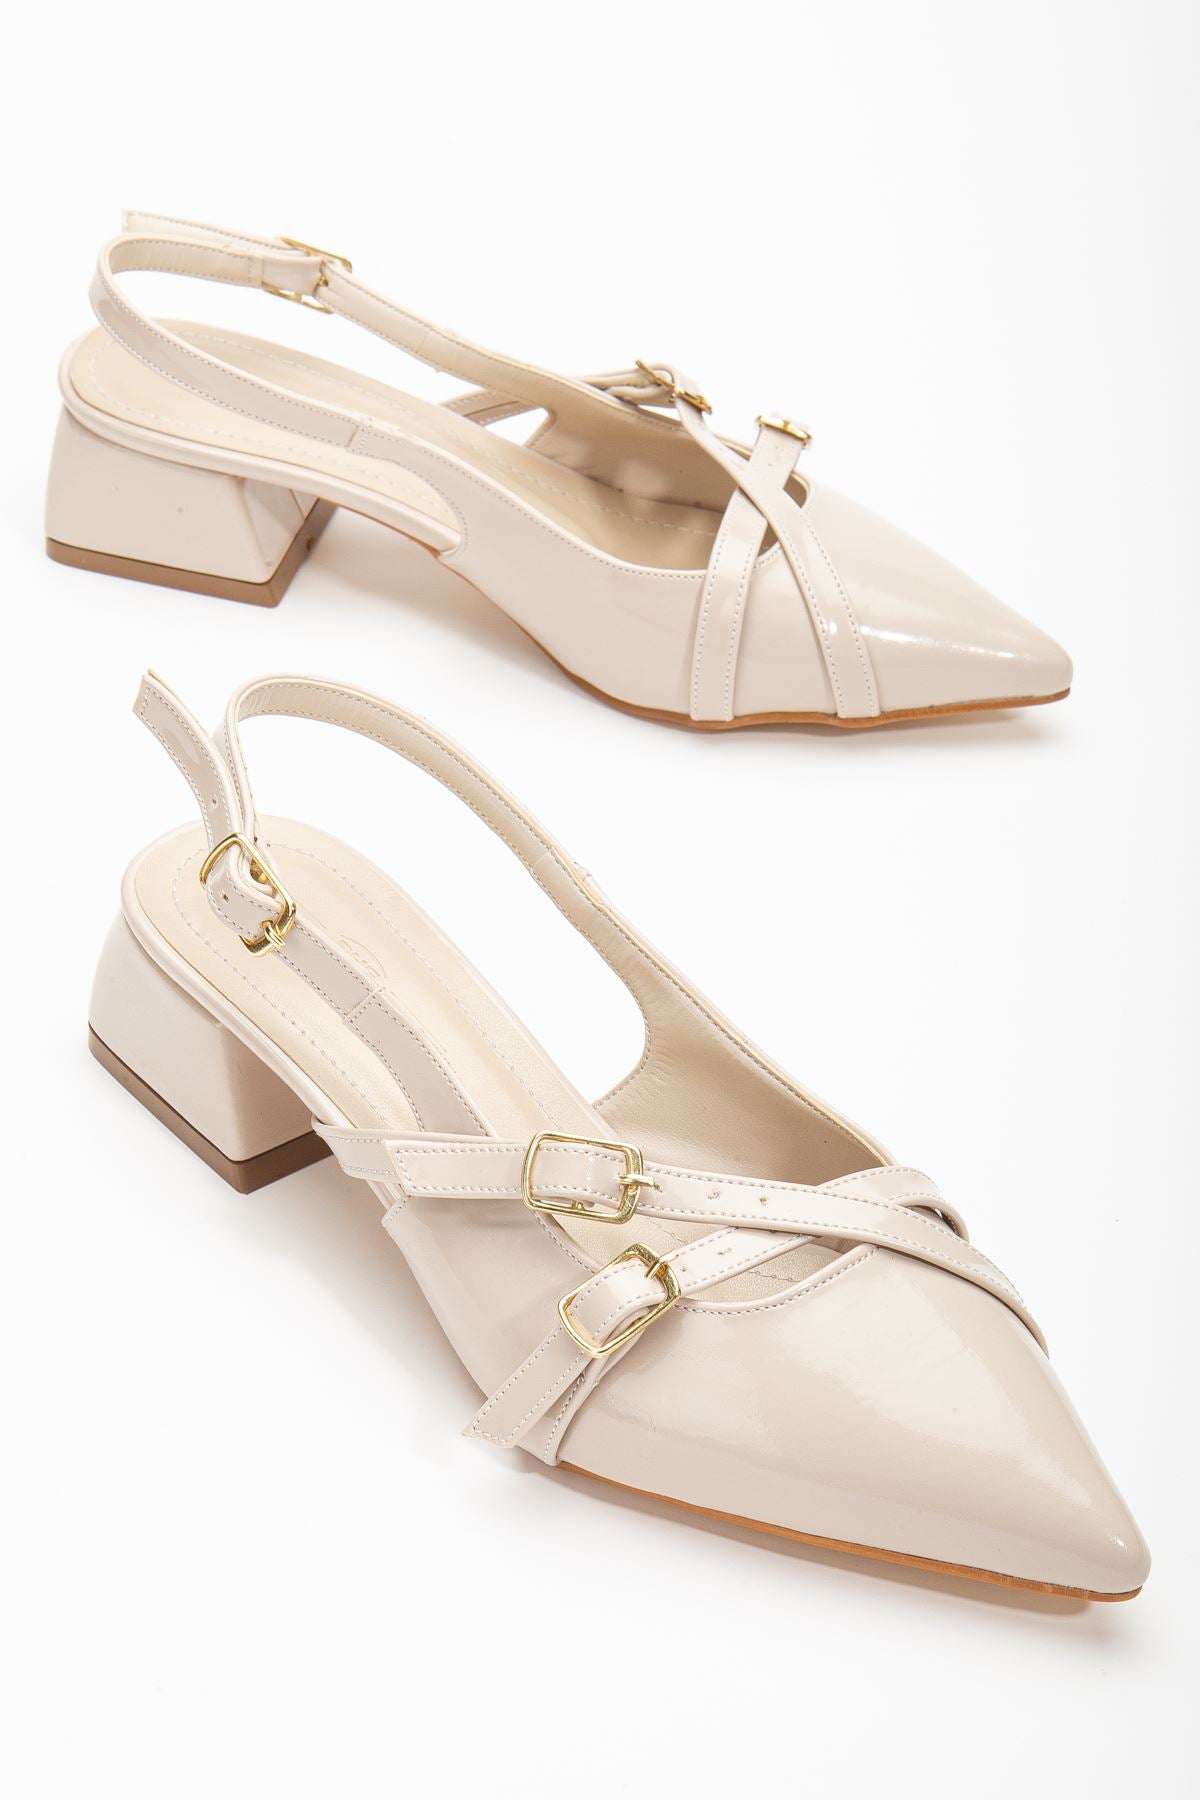 Pary Cream Patent Leather Women's Heeled Shoes - STREETMODE™